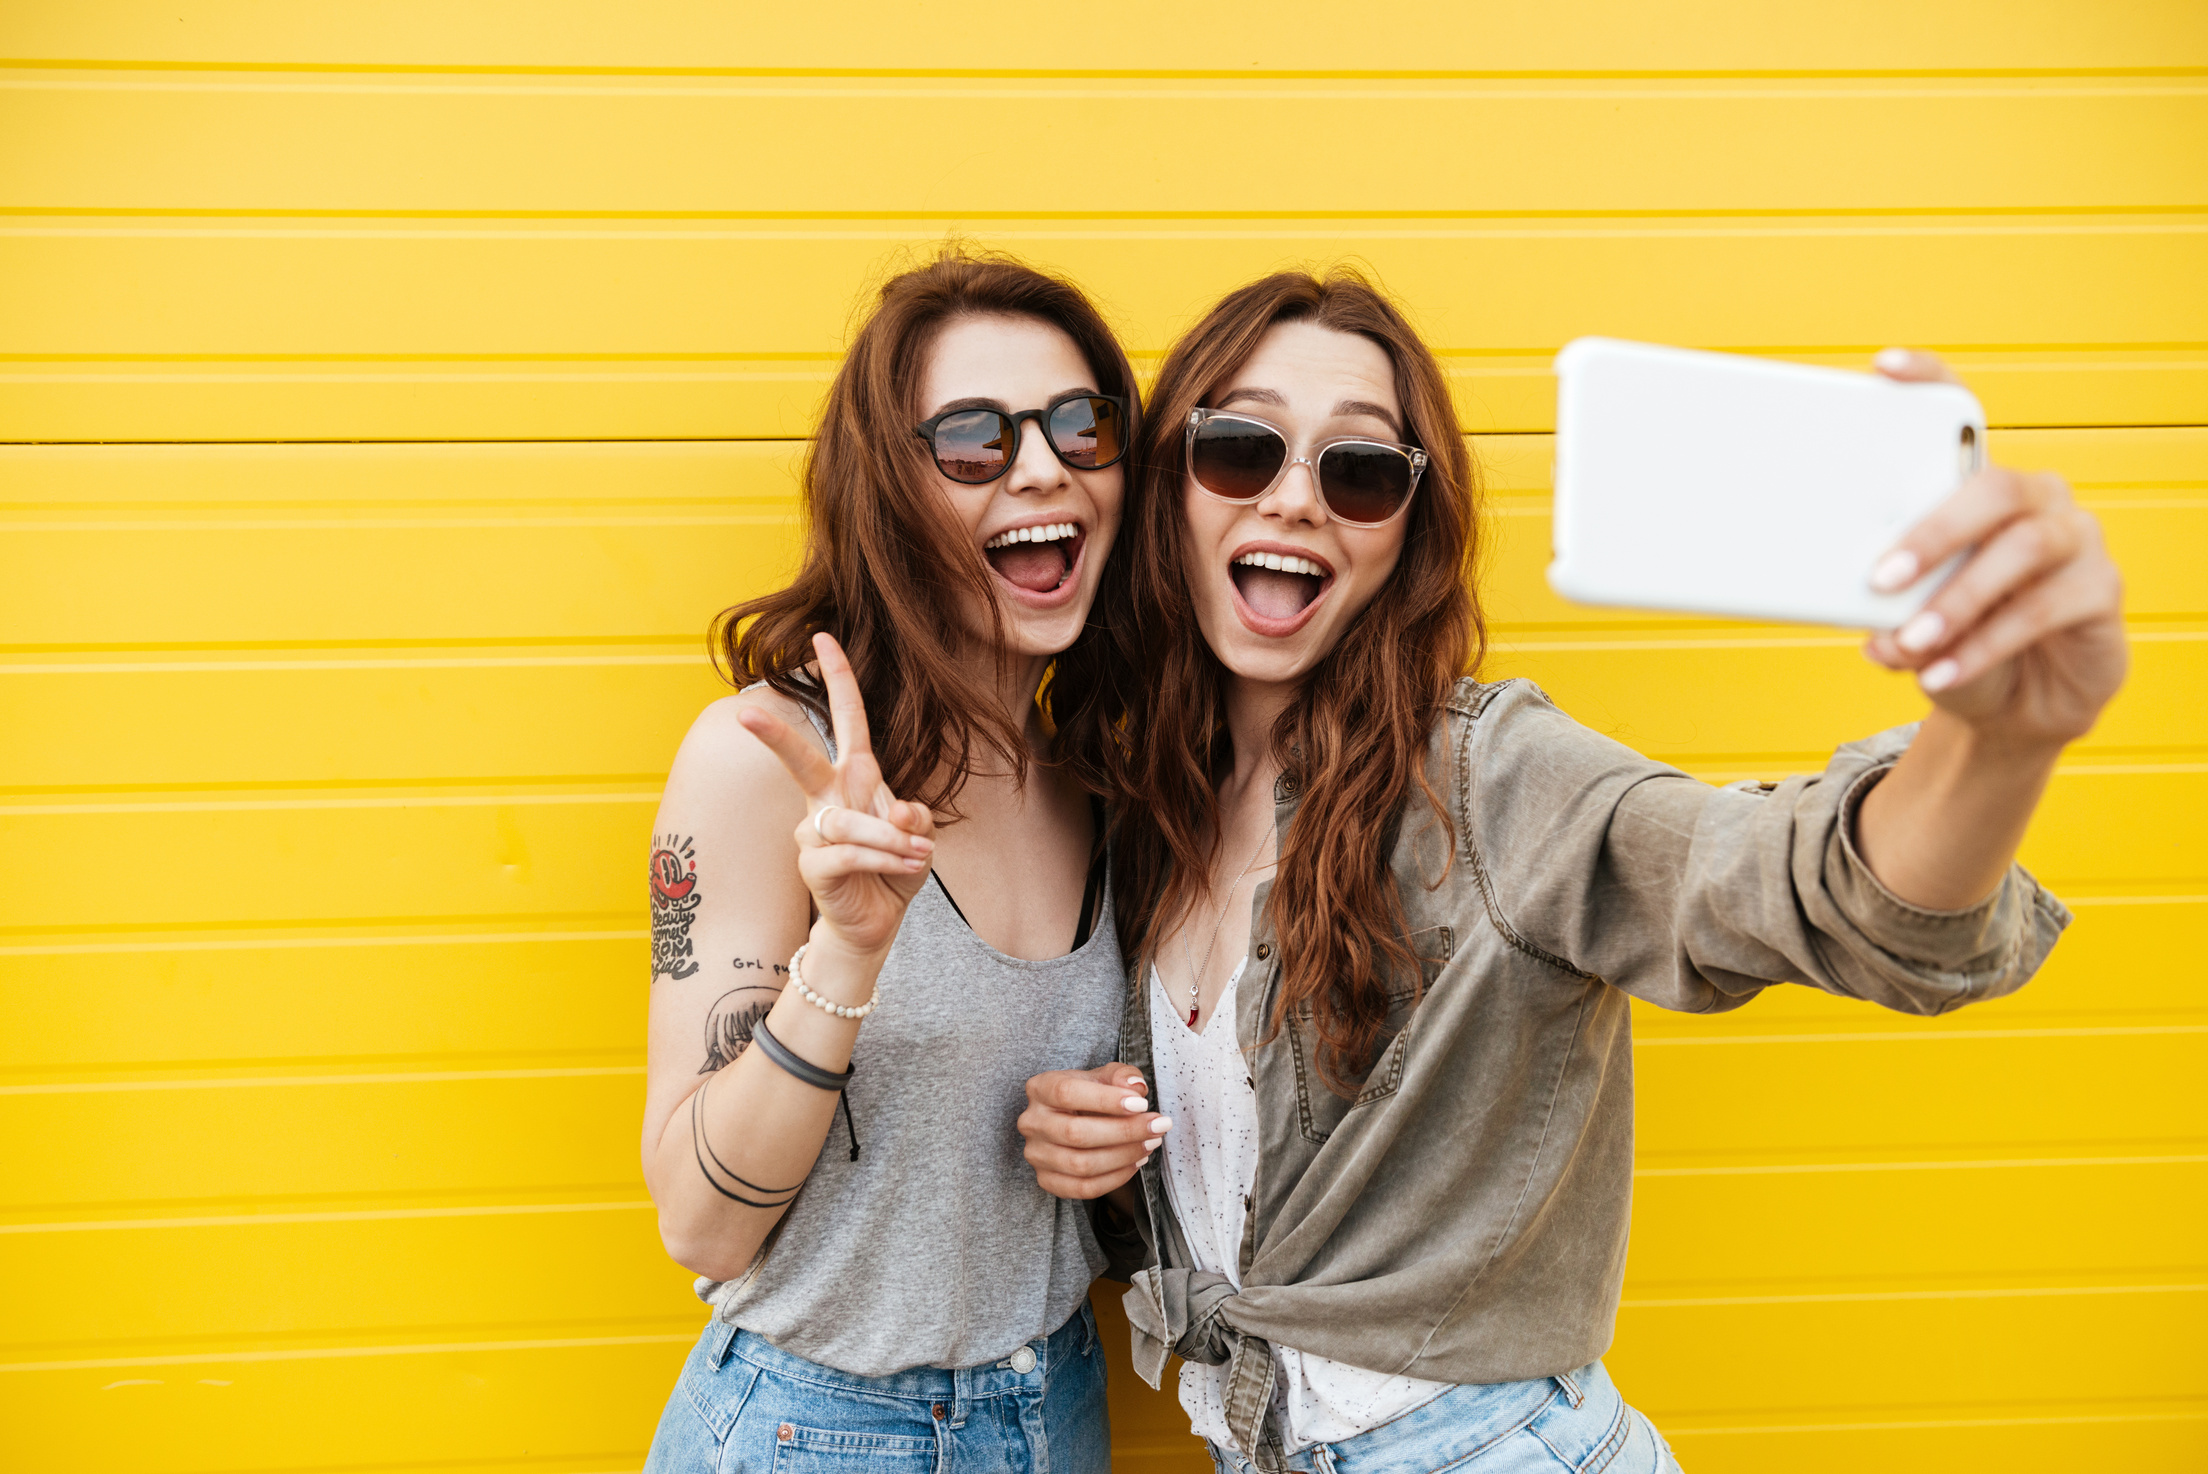 Two girl friends taking a selfie. Finding new friends for adventures is easy with Buddy Pass! 